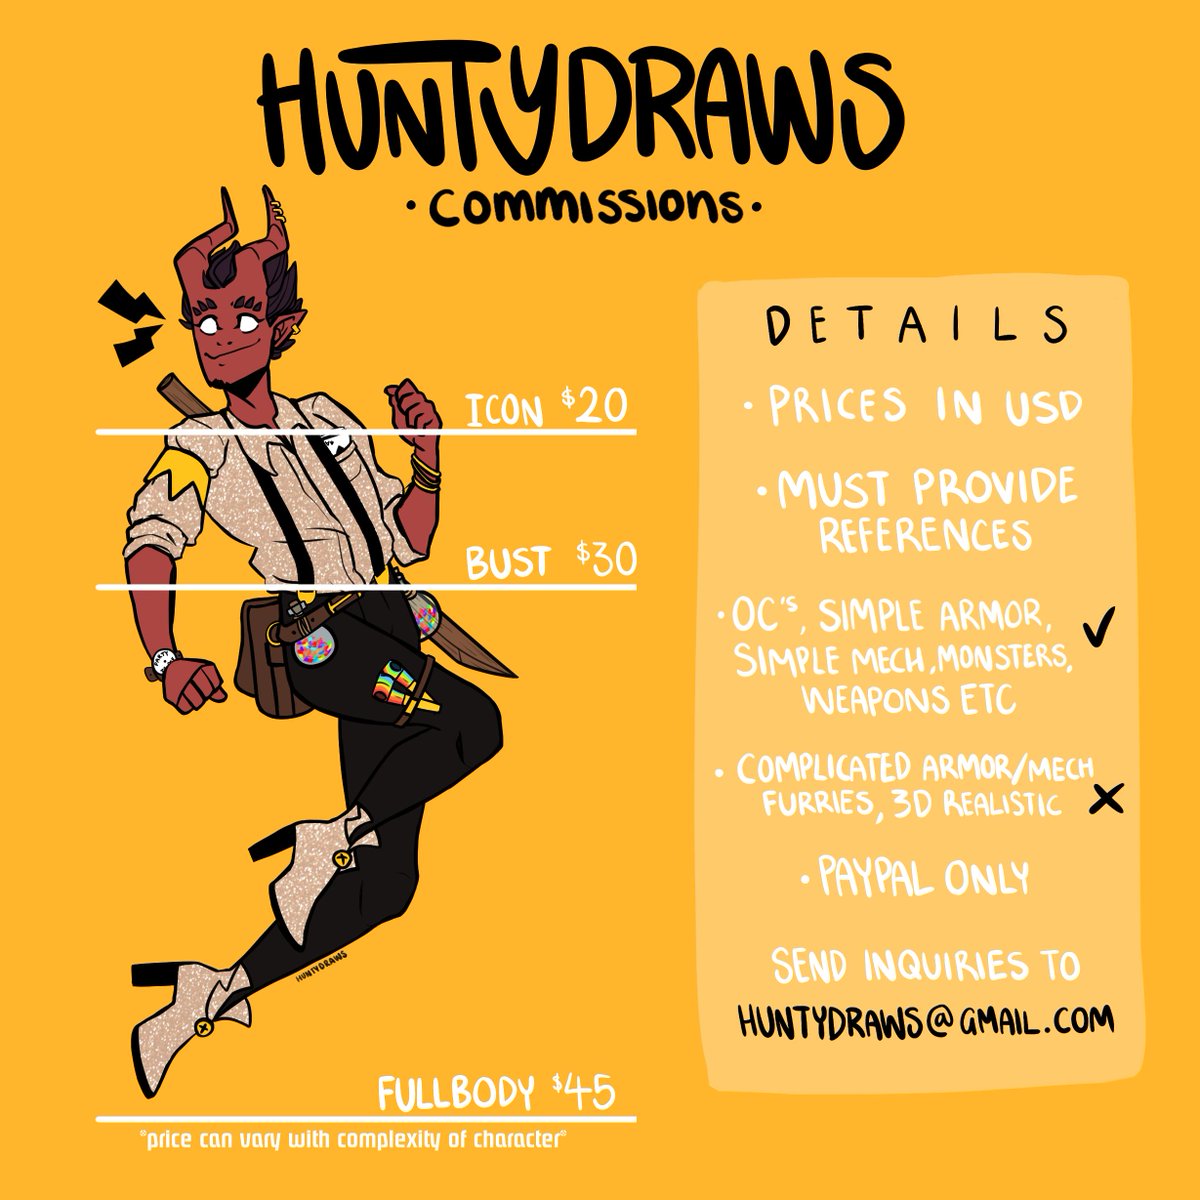 ⚡️COMMISSIONS OPEN ⚡️

I'm open for all commission types, Get in while they're hot!

Email huntydraws@gmail.com for inquiries! 
Other work examples: https://t.co/JcPIkzFxj1

✨RT's appreciated! ✨ 